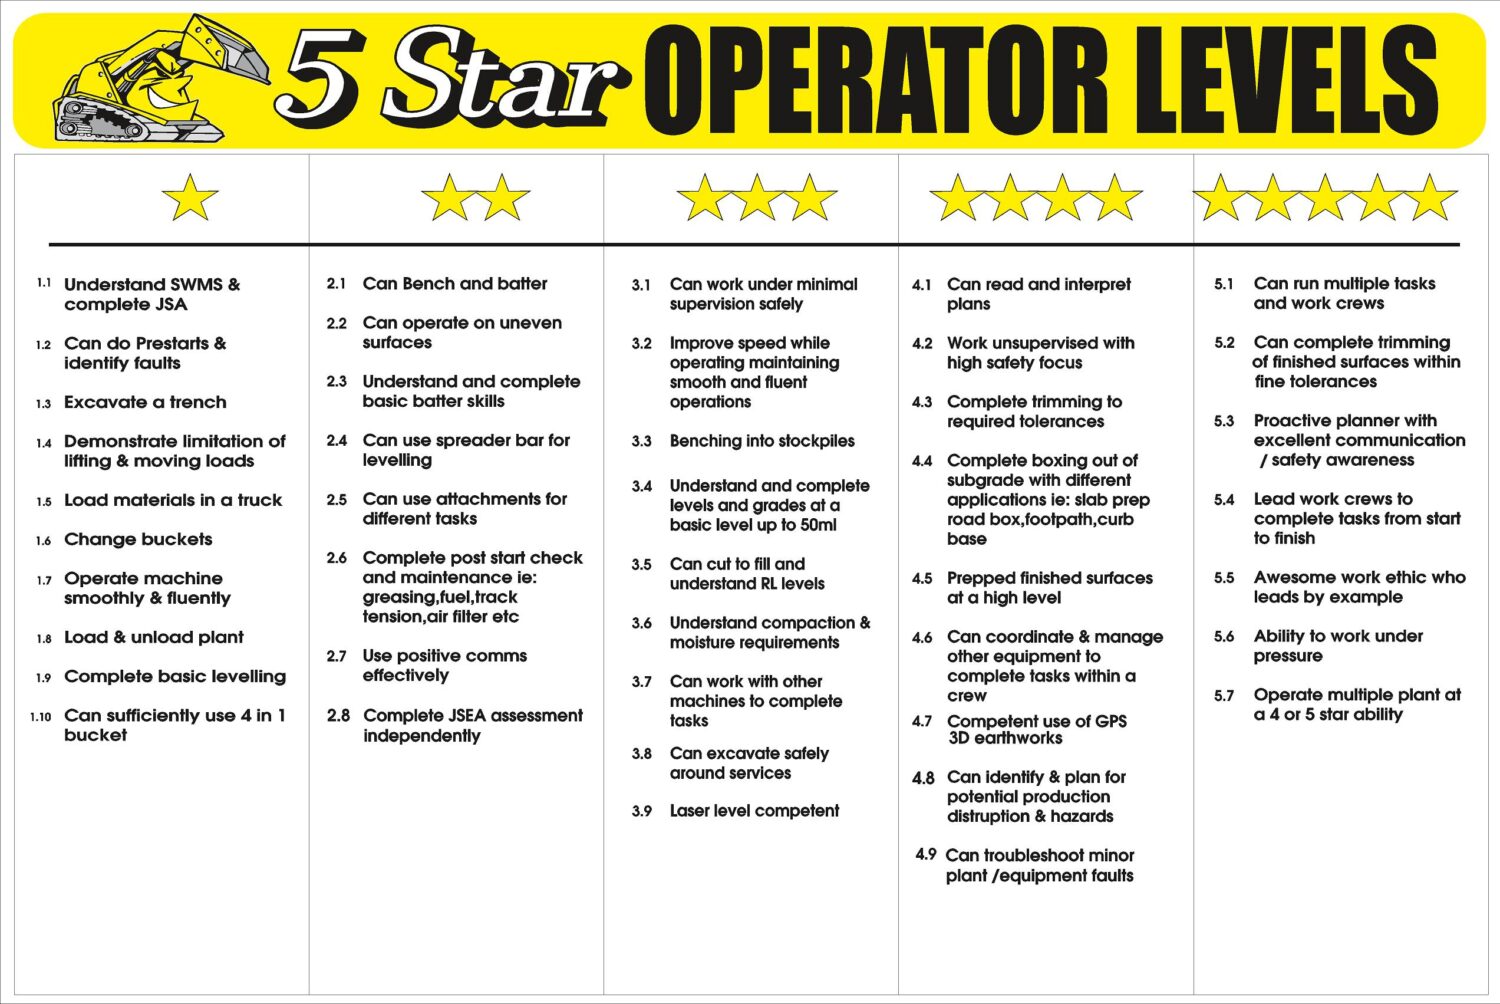 5 Star Operator Levels by Diggerman